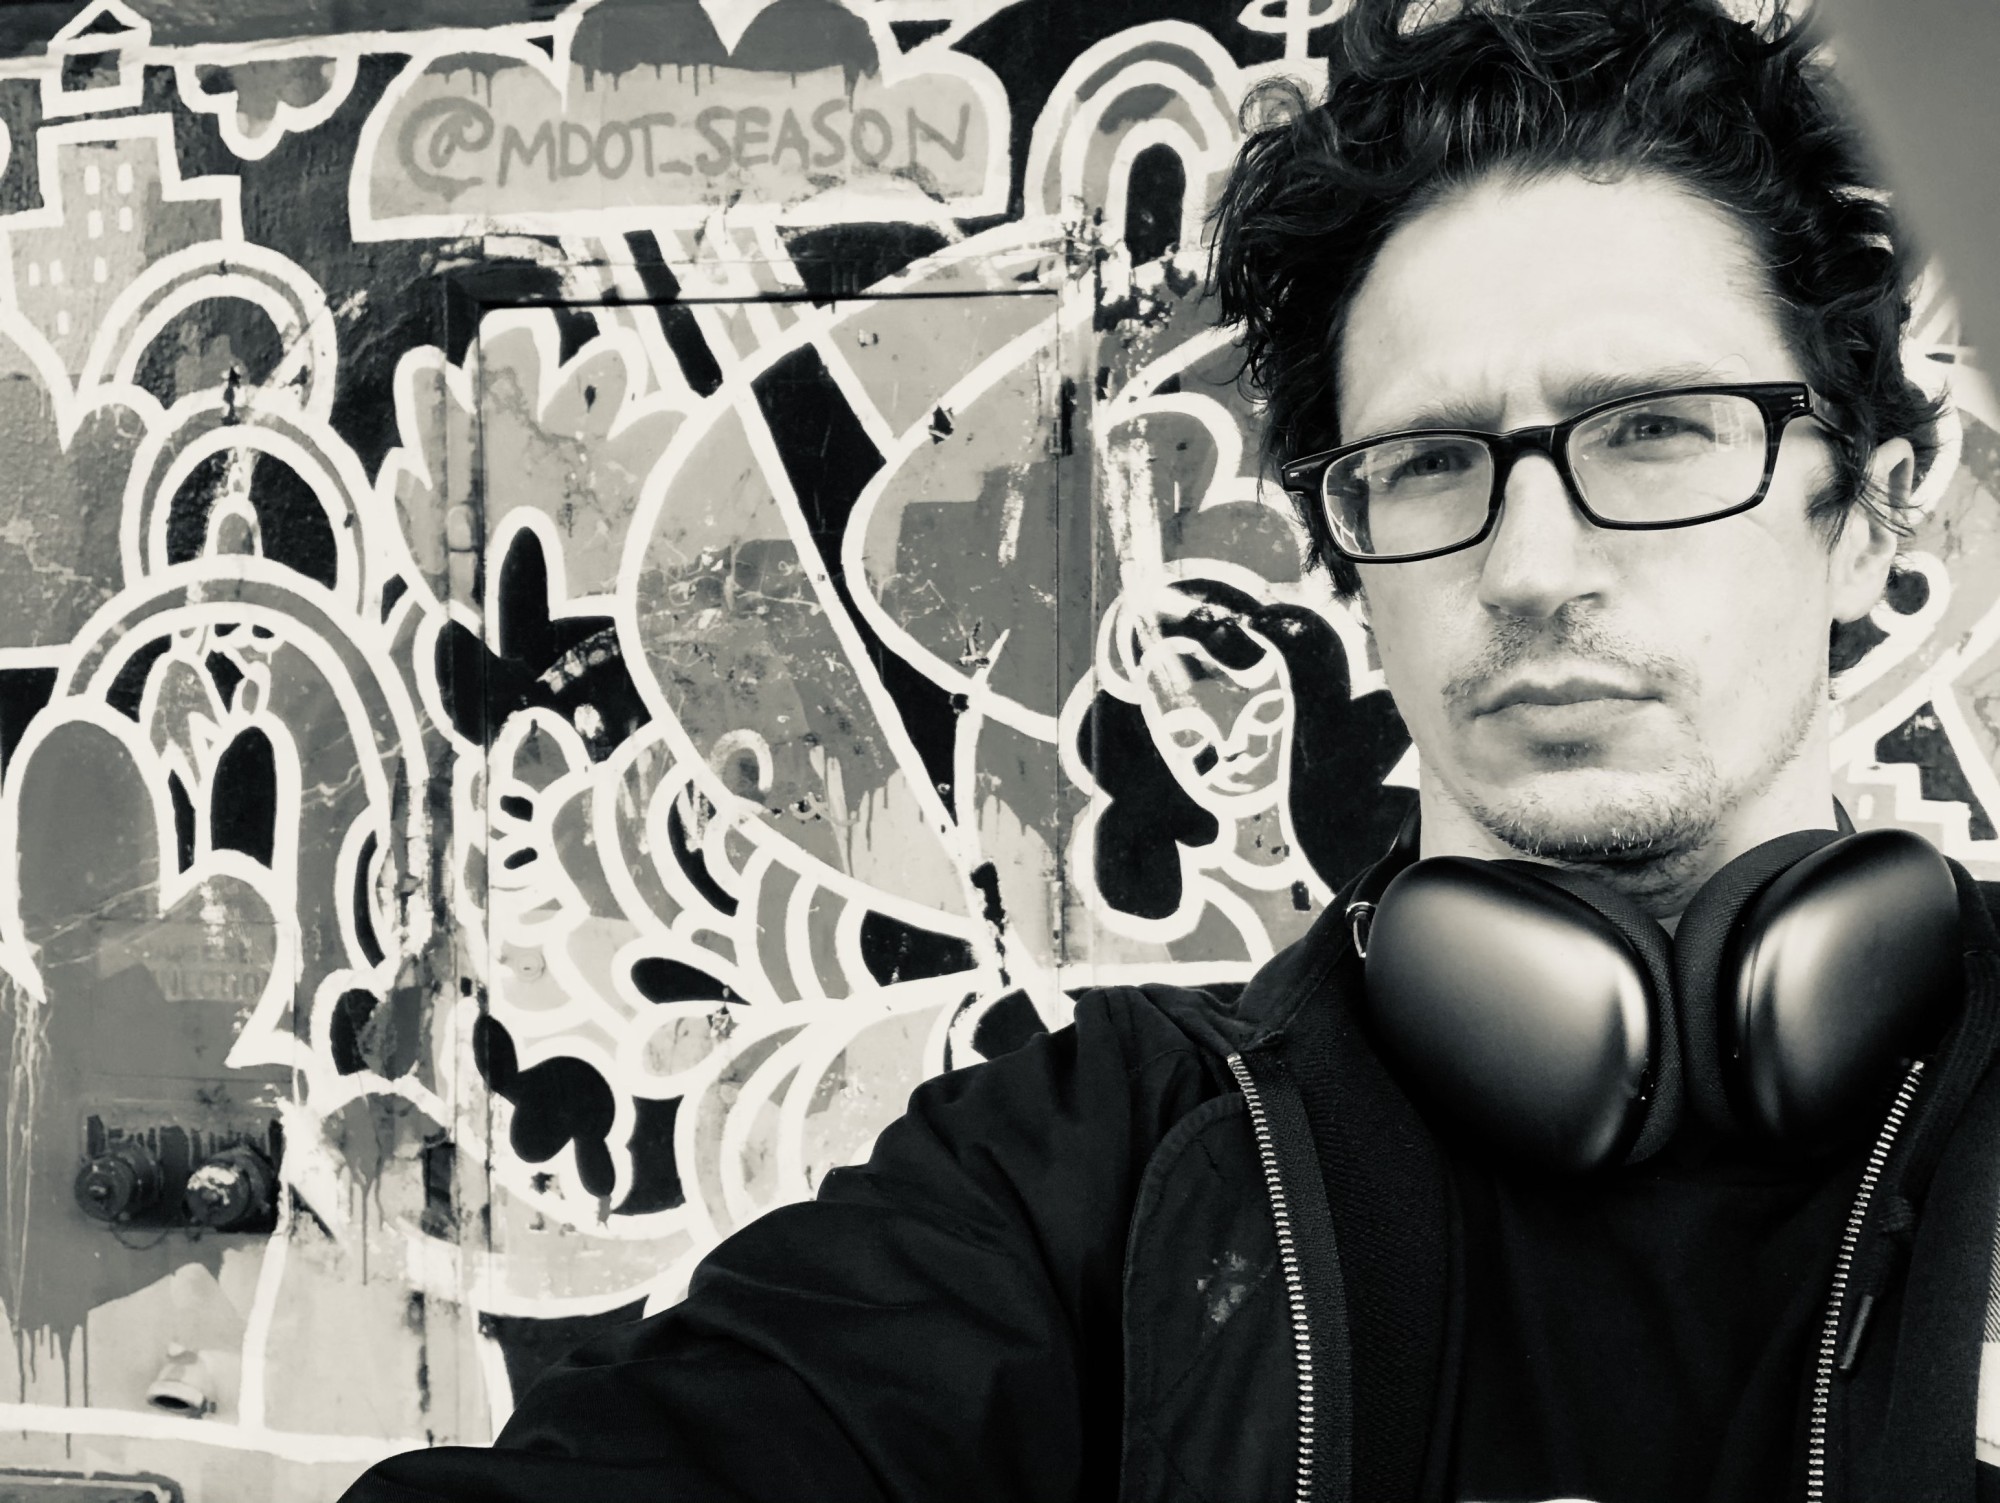 In this black and white photo, Gregory Grube stands in front of graffiti, with large headphones hanging around his neck